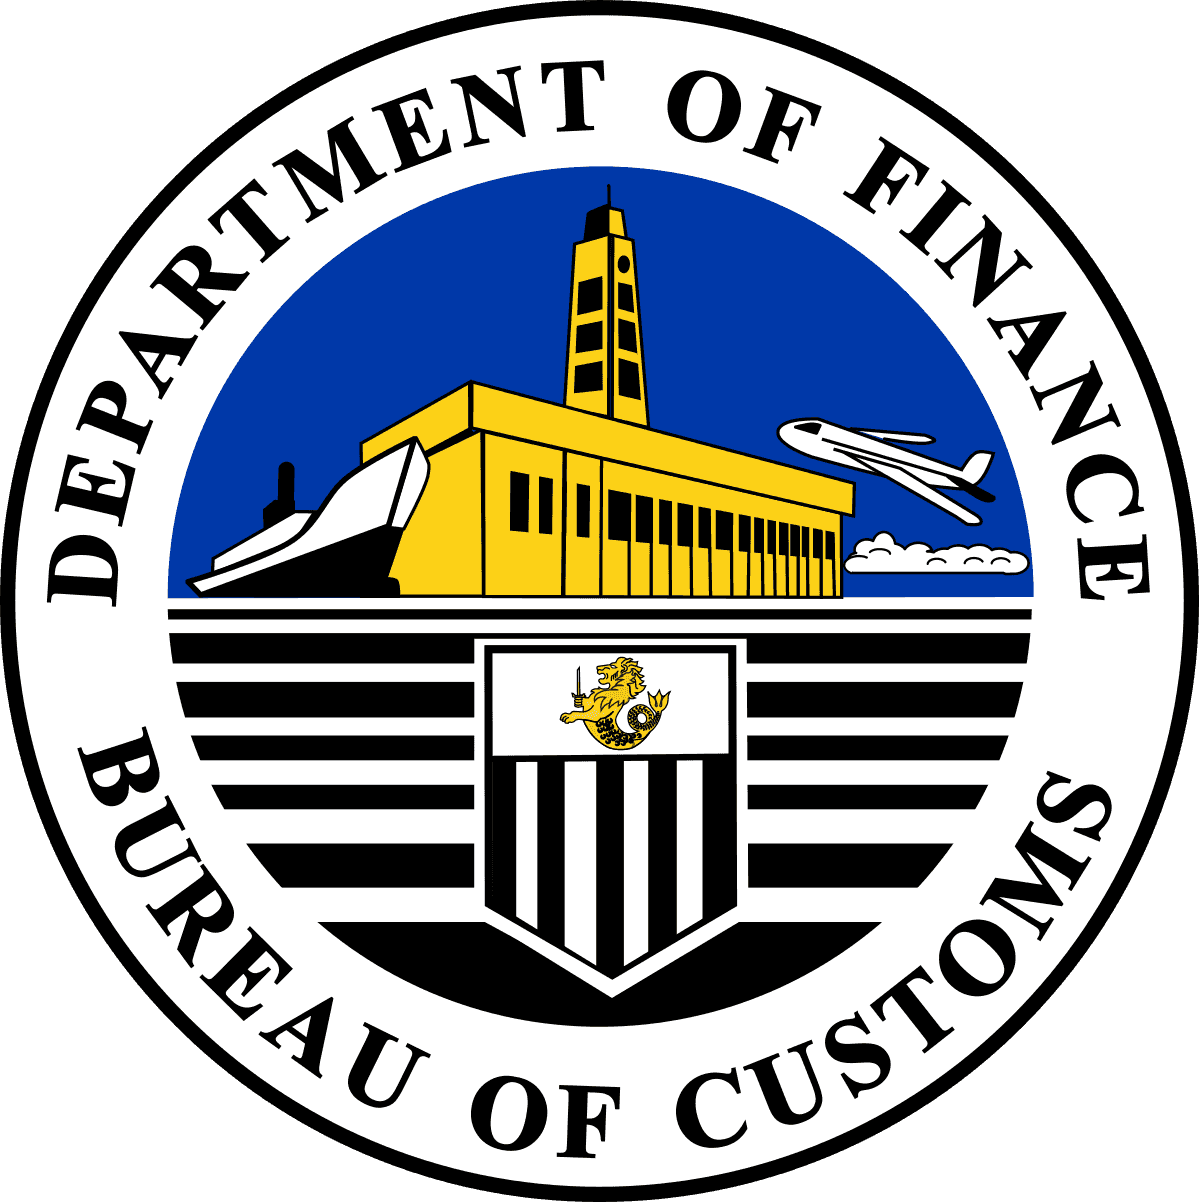 6 customs officials in Subic reassigned amid pending probe  —Palace